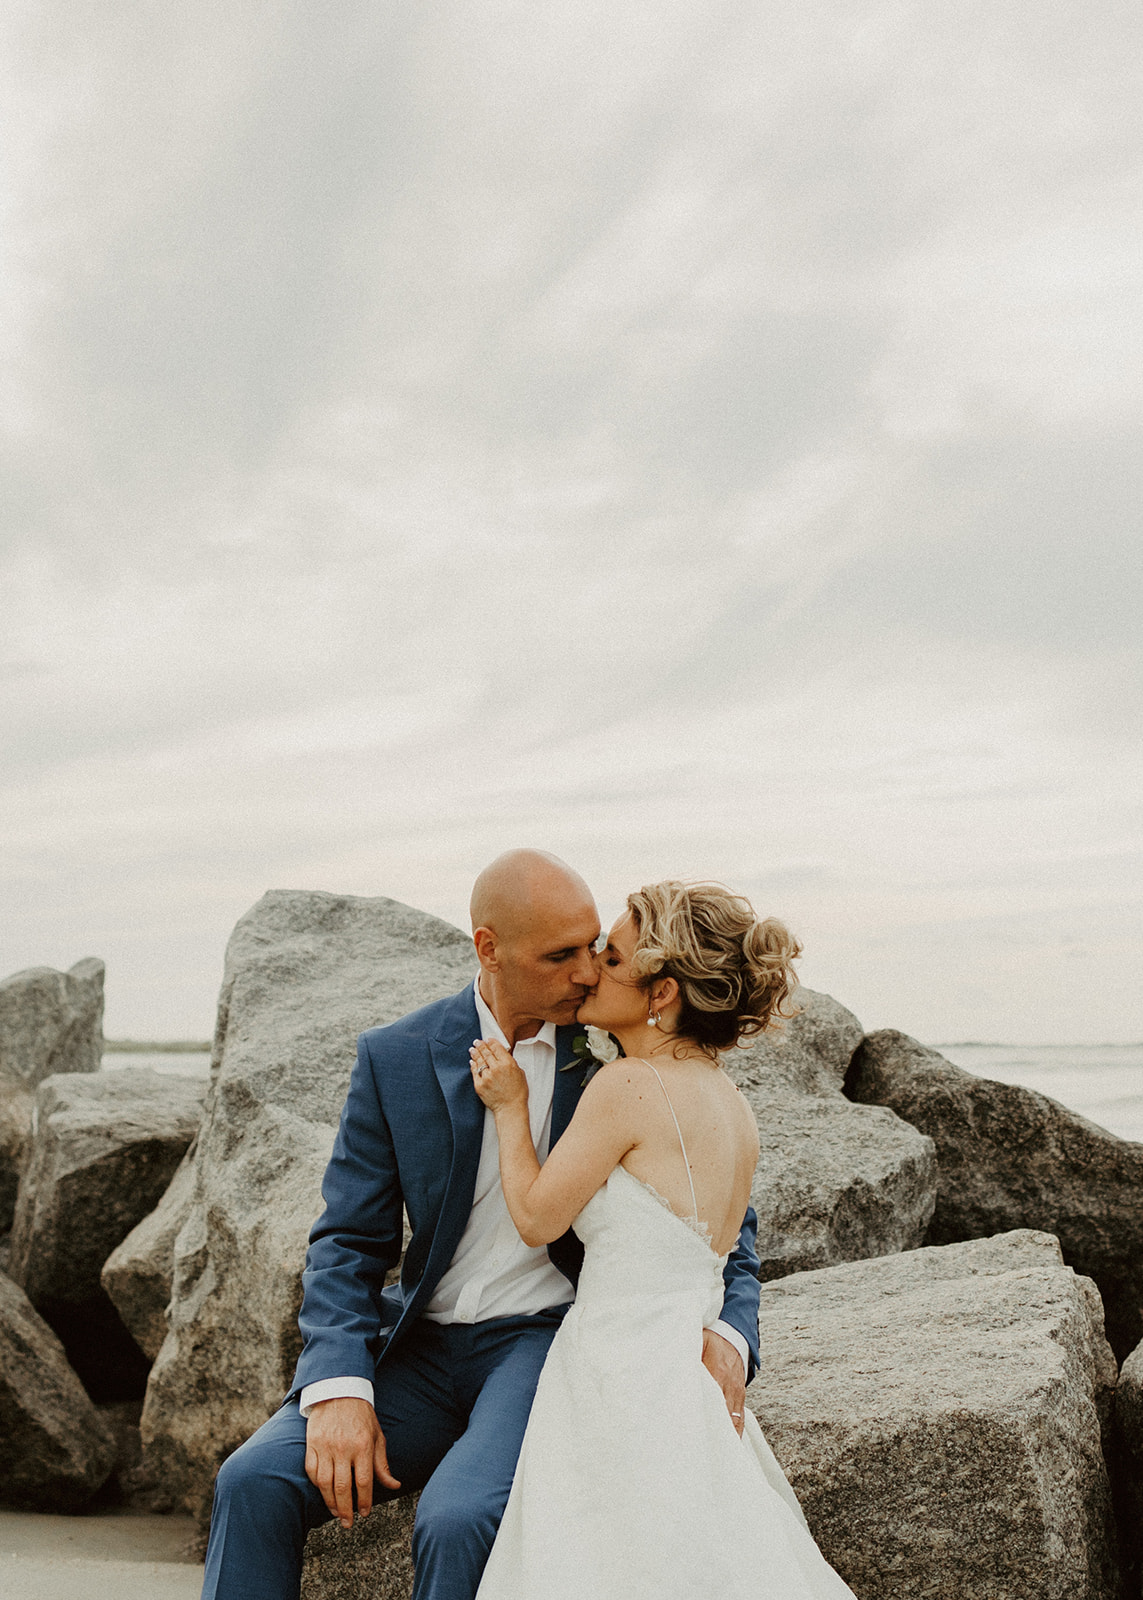 the couple kissing by beach rocks